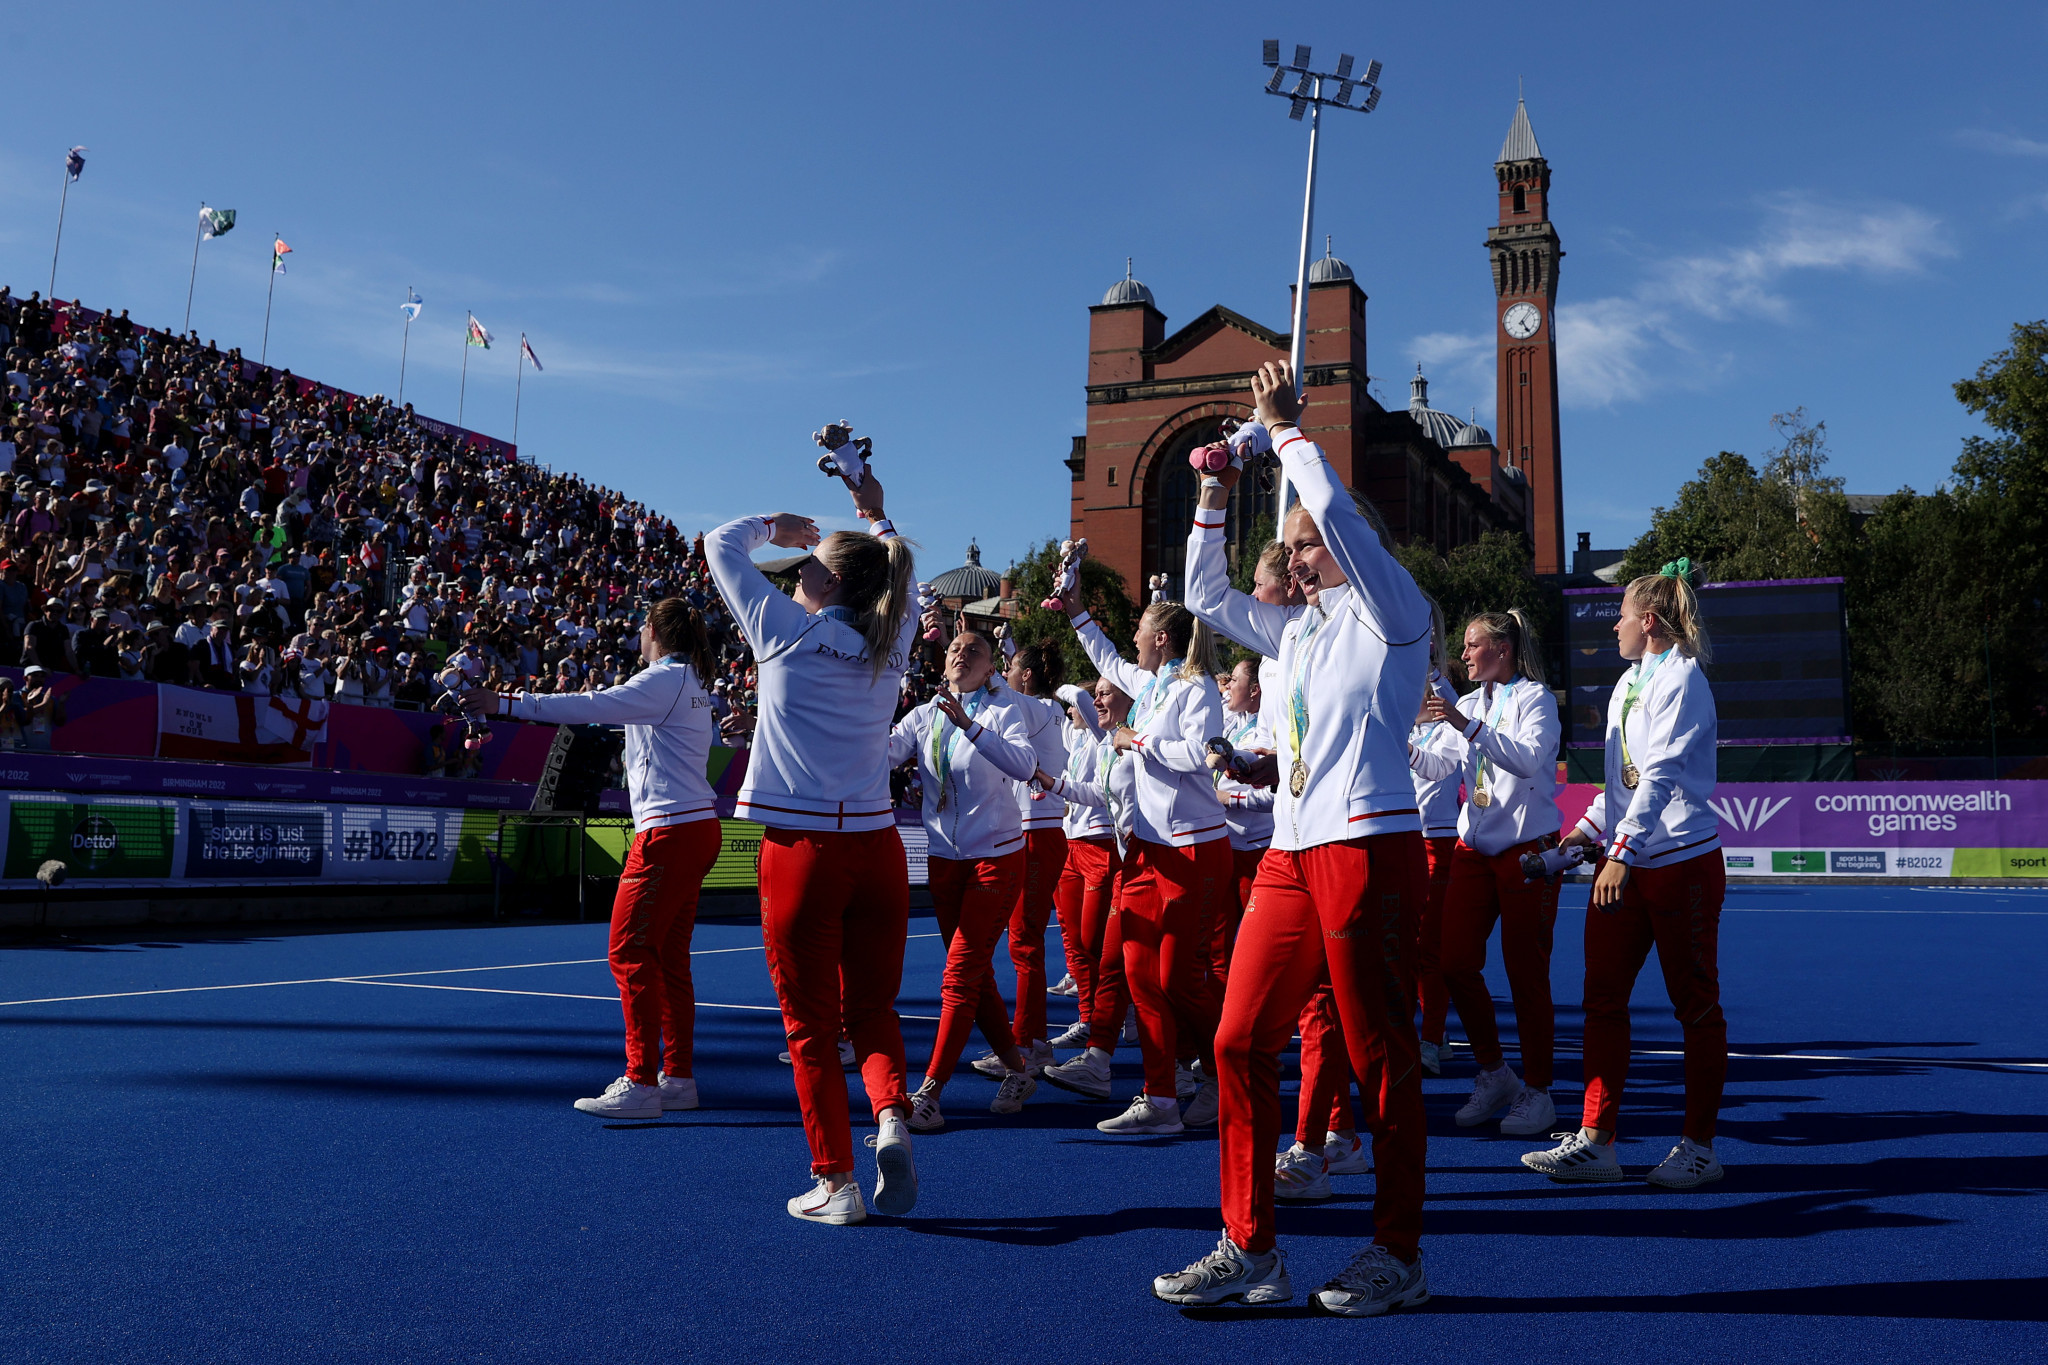 "Super Sunday" sees 45 gold medals awarded on penultimate day of Birmingham 2022